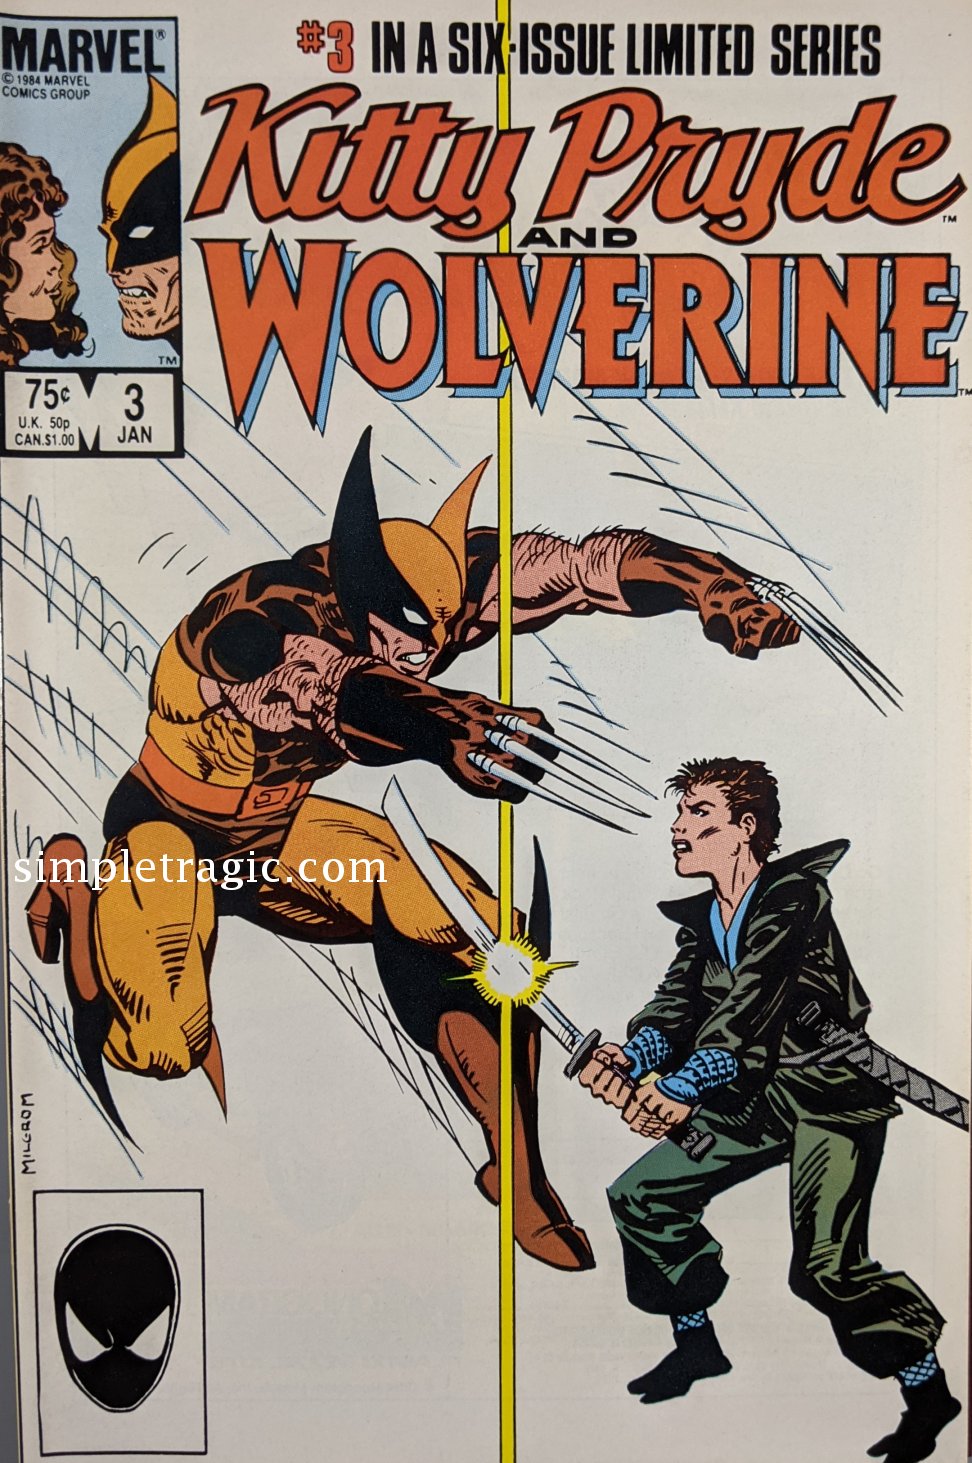 Kitty Pryde & Wolverine #3 Comic Book Cover Art